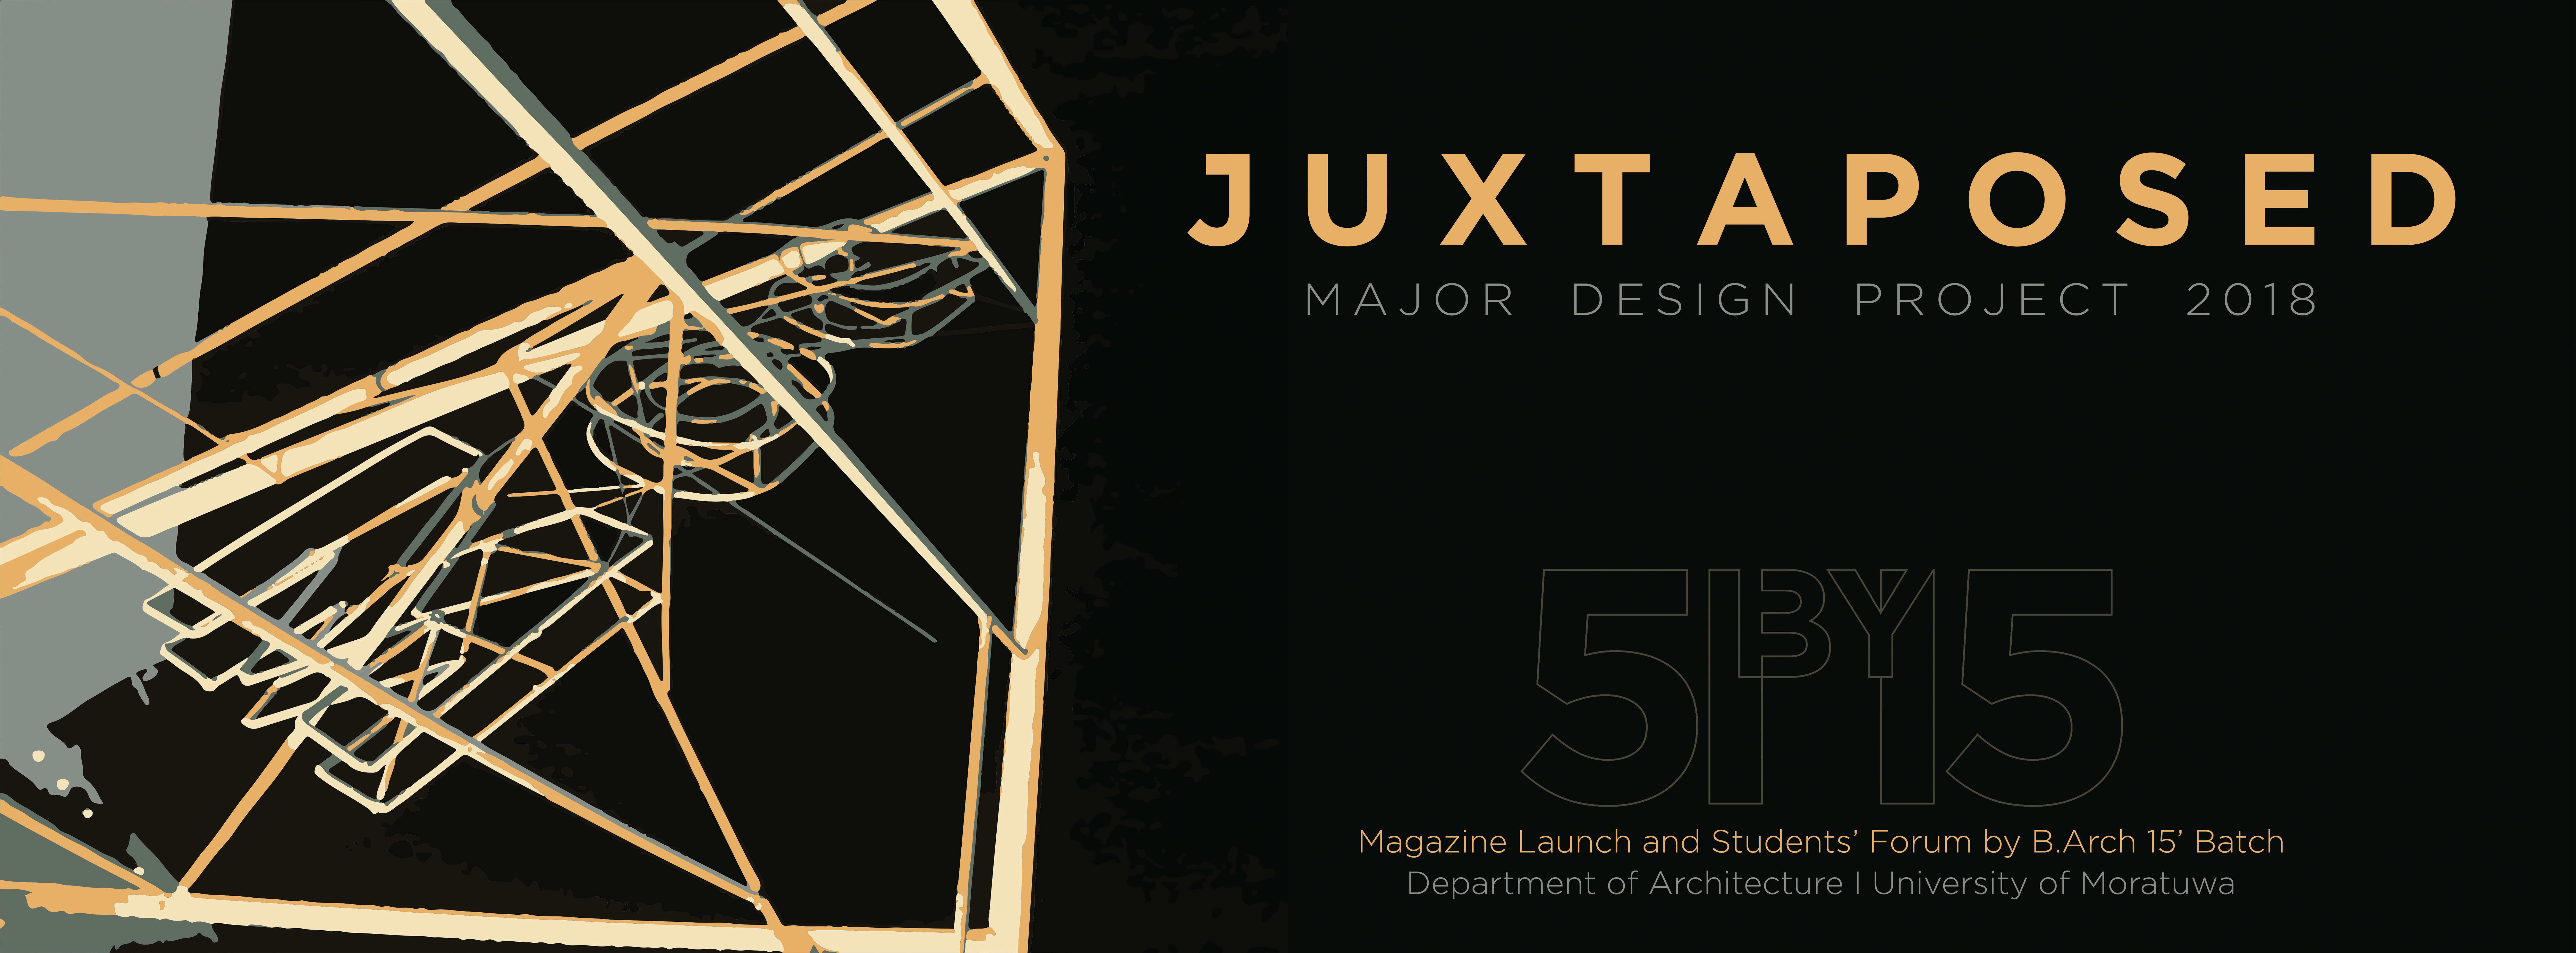 JUXTAPOSED-Magazine launch on Major Design Project 2018 and Student Forum by B.Arch. 15’ Batch